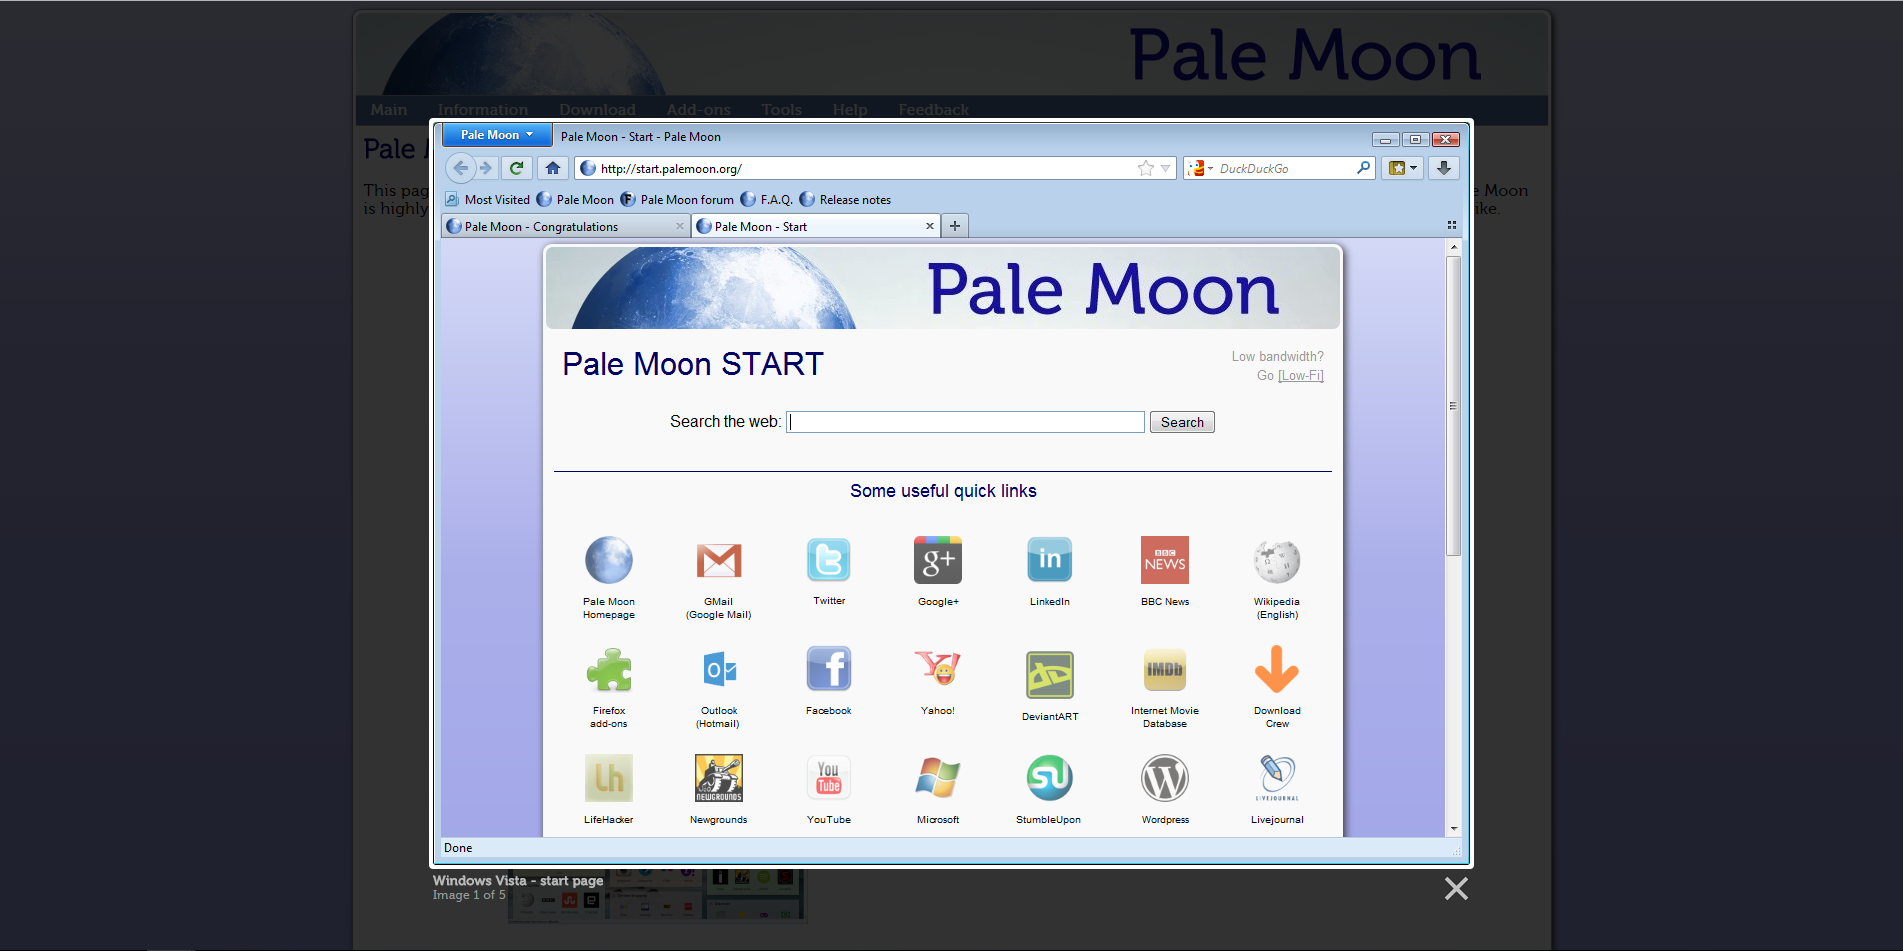 pale moon browser review